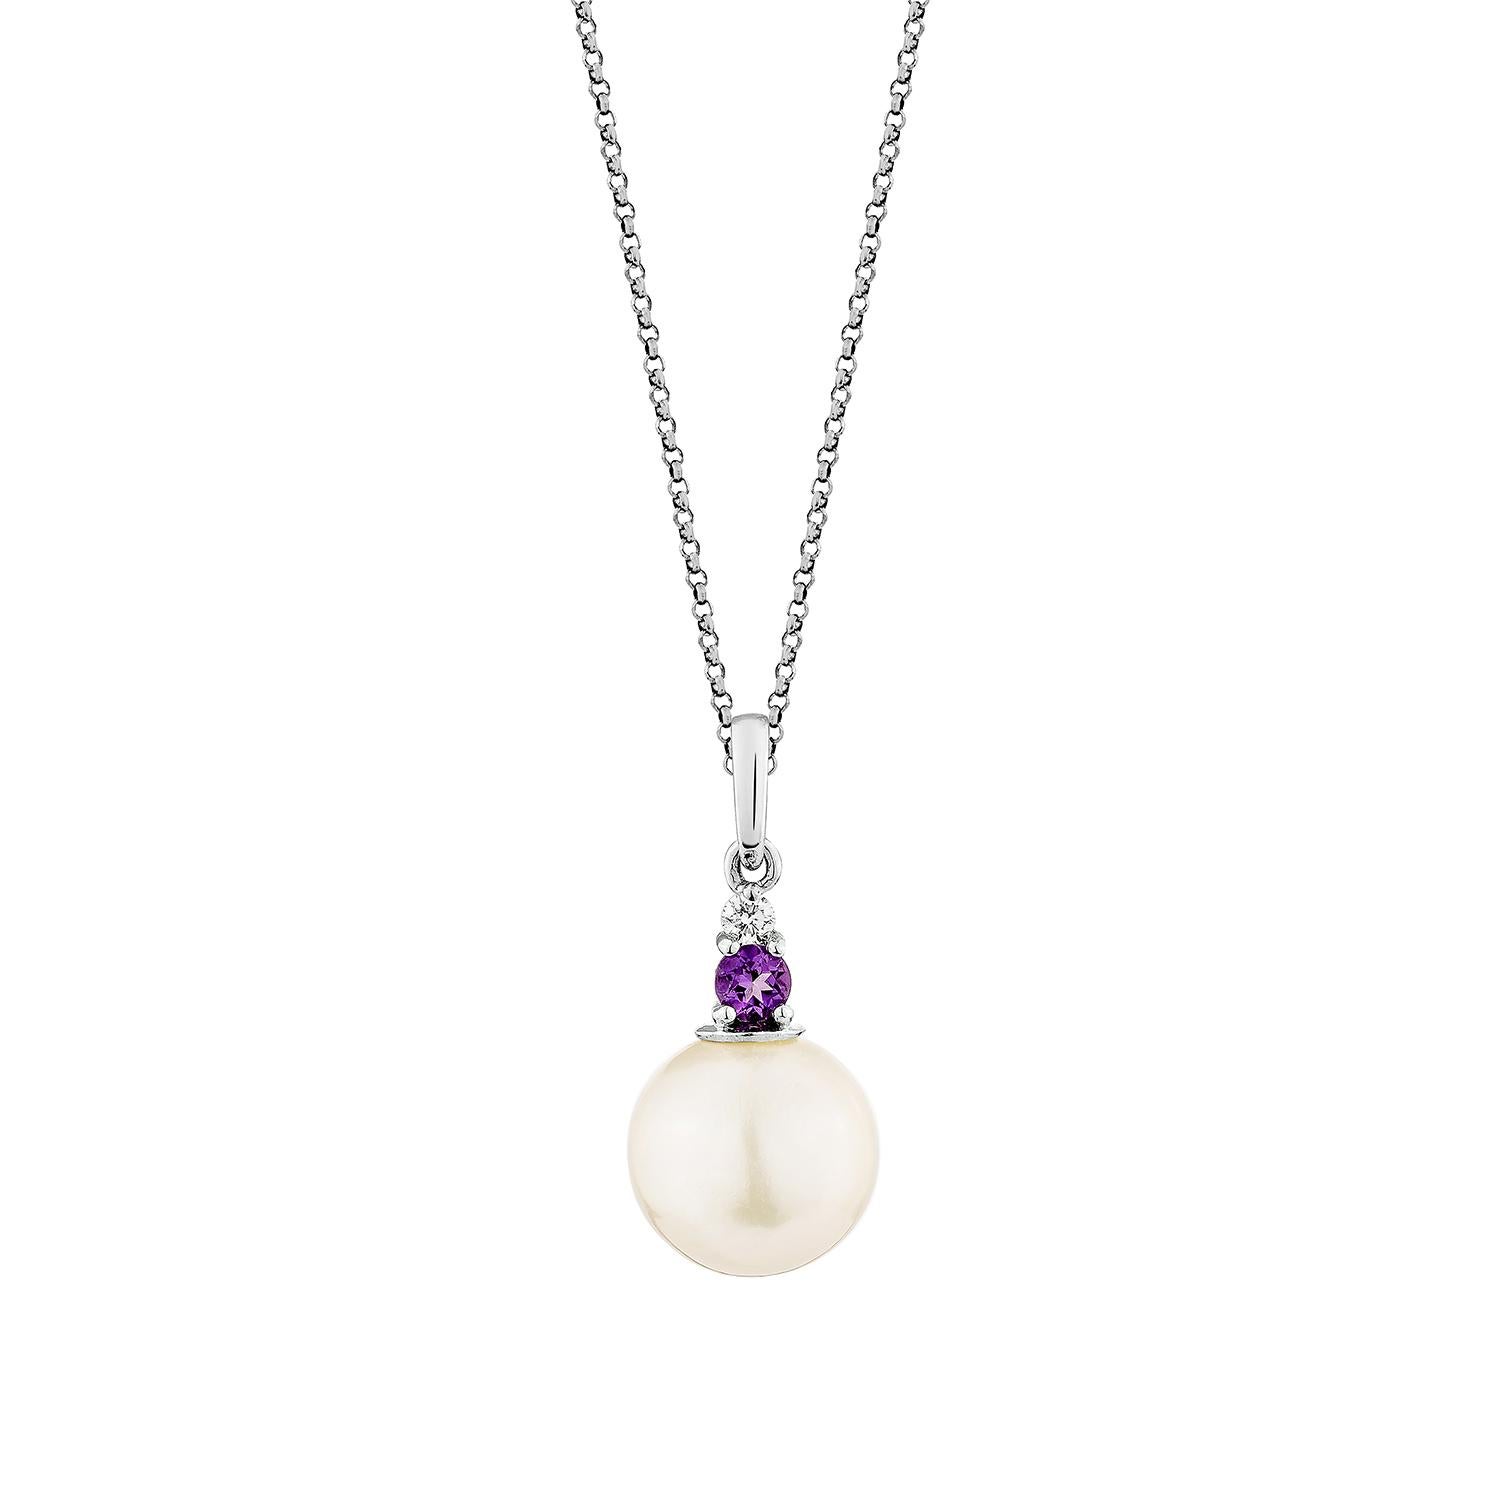 Presented A lovely White pearl and Amethyst pendant is perfect for people who value quality and want to wear it to any occasion or celebration. The White gold White pearl pendant adorned with Amethyst and White diamond offer a classic yet elegant